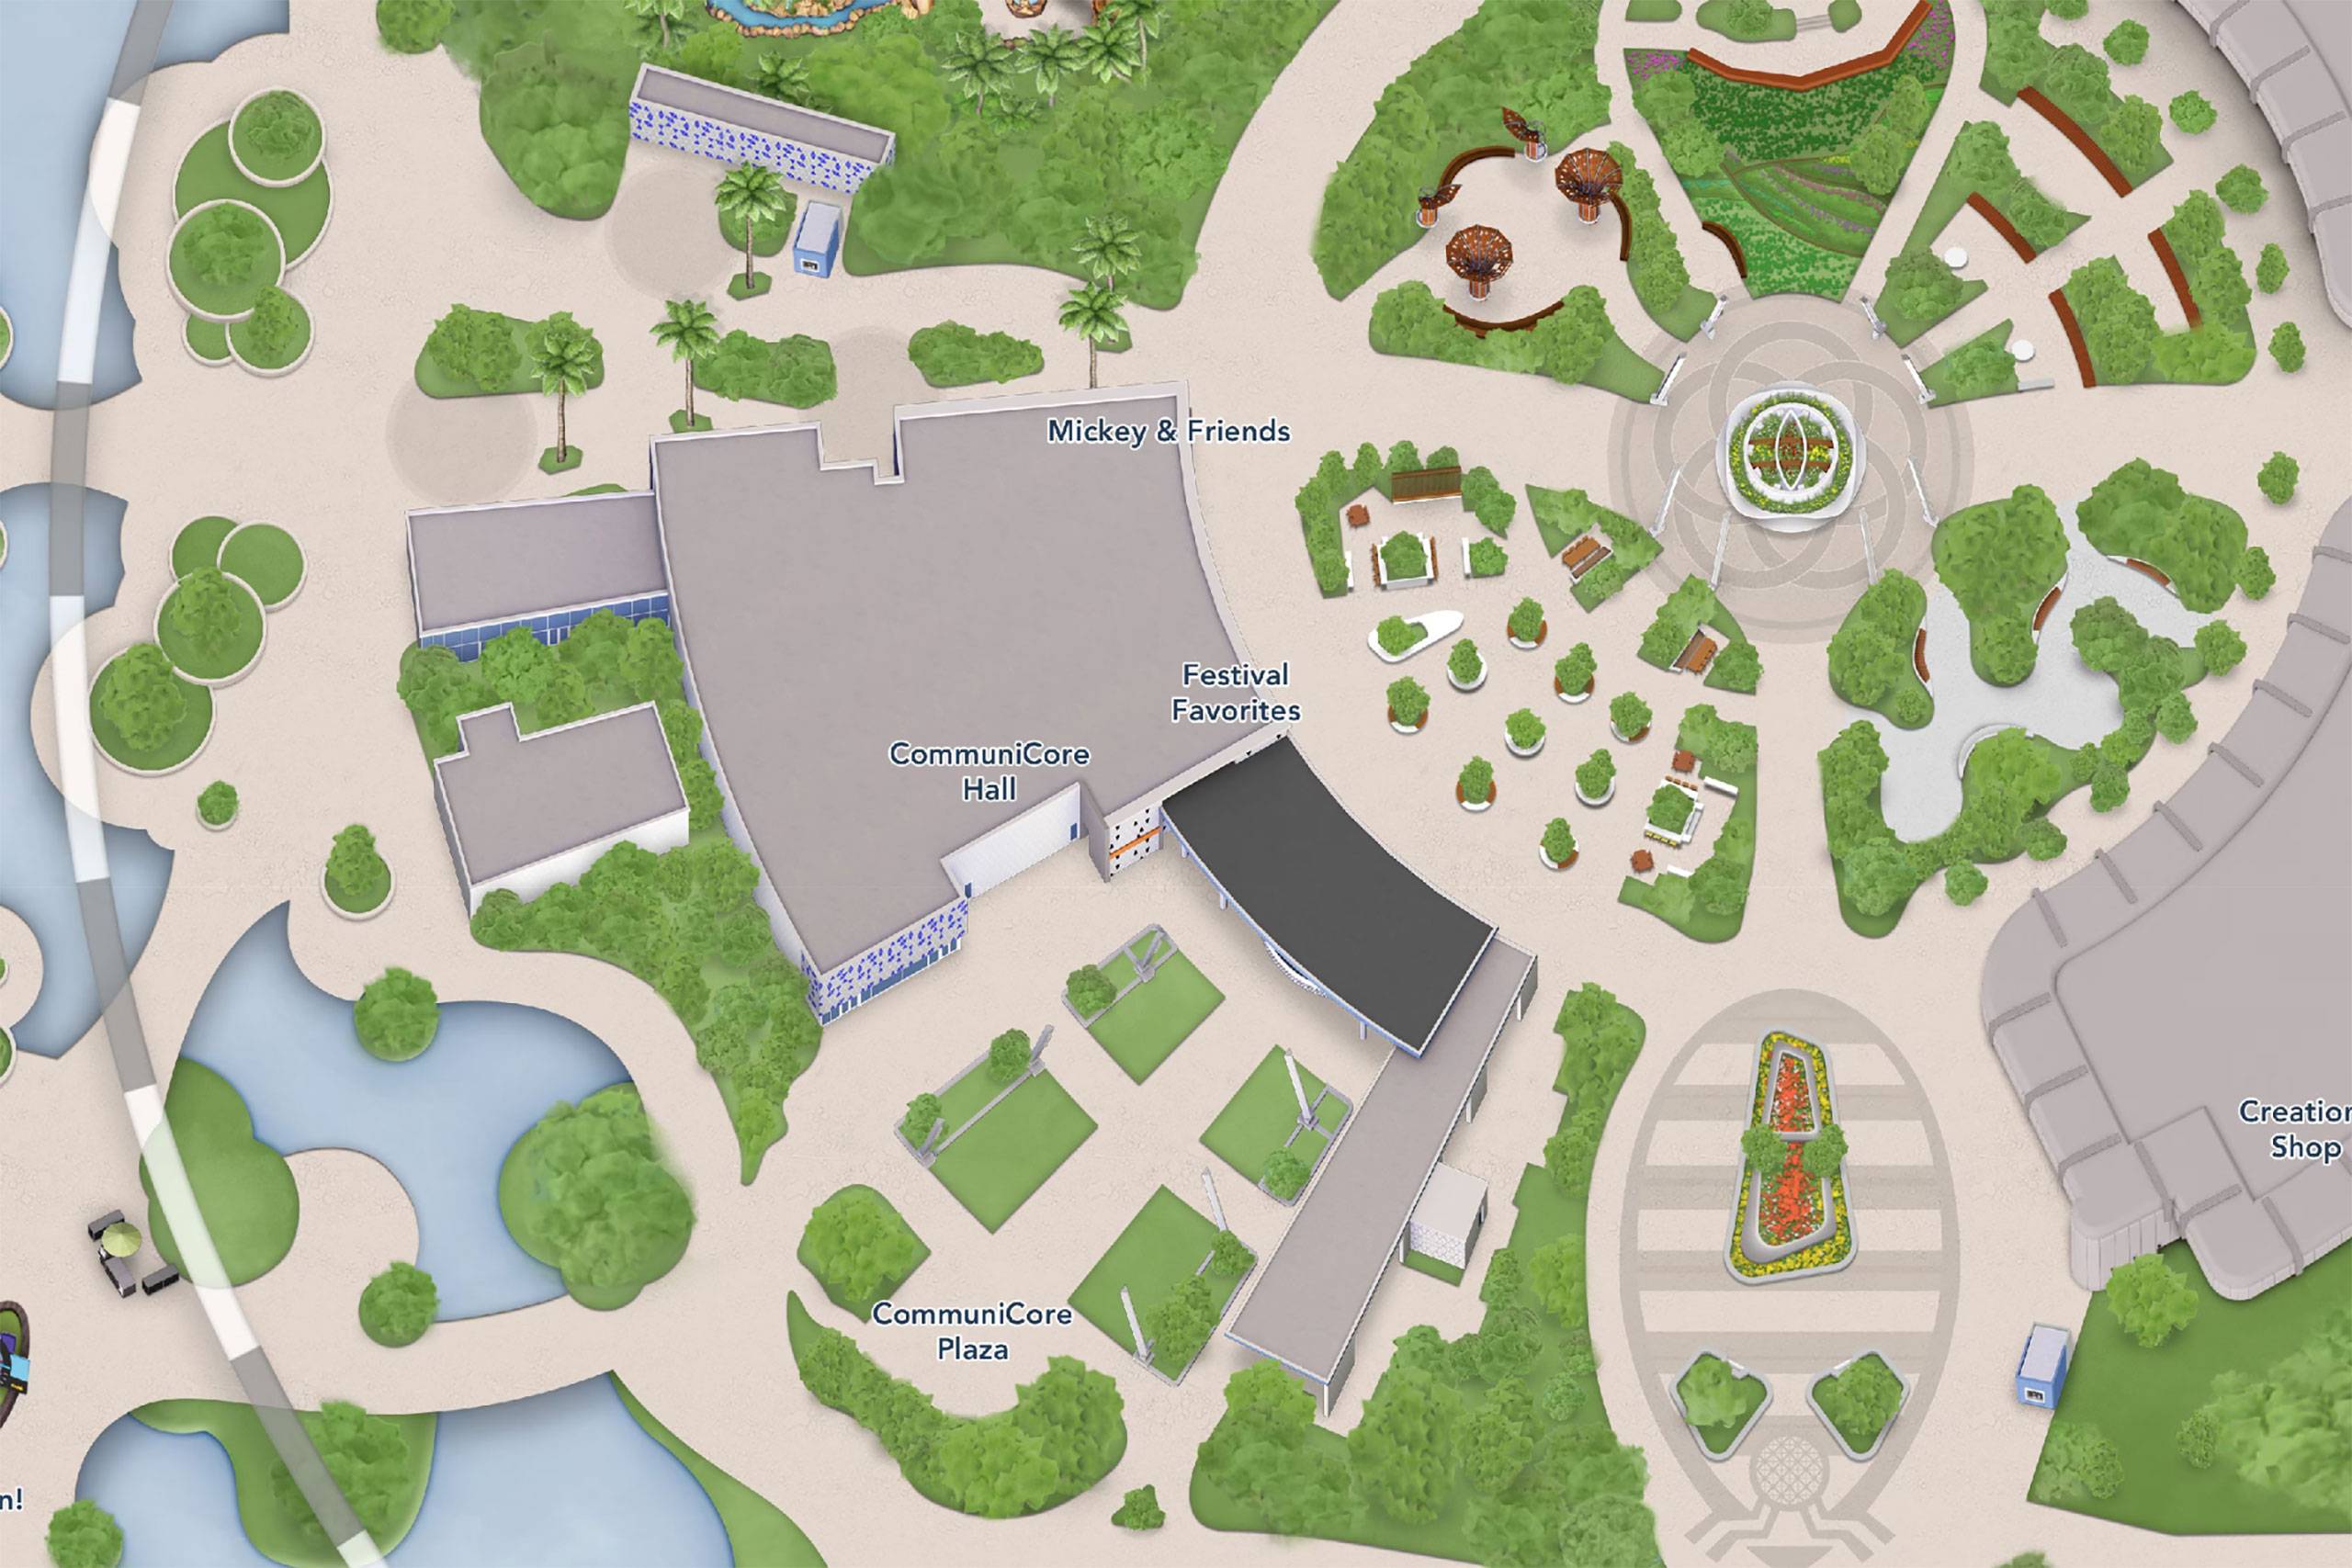 EPCOT Digital Guide Map Updated To Include CommuniCore Hall and Plaza